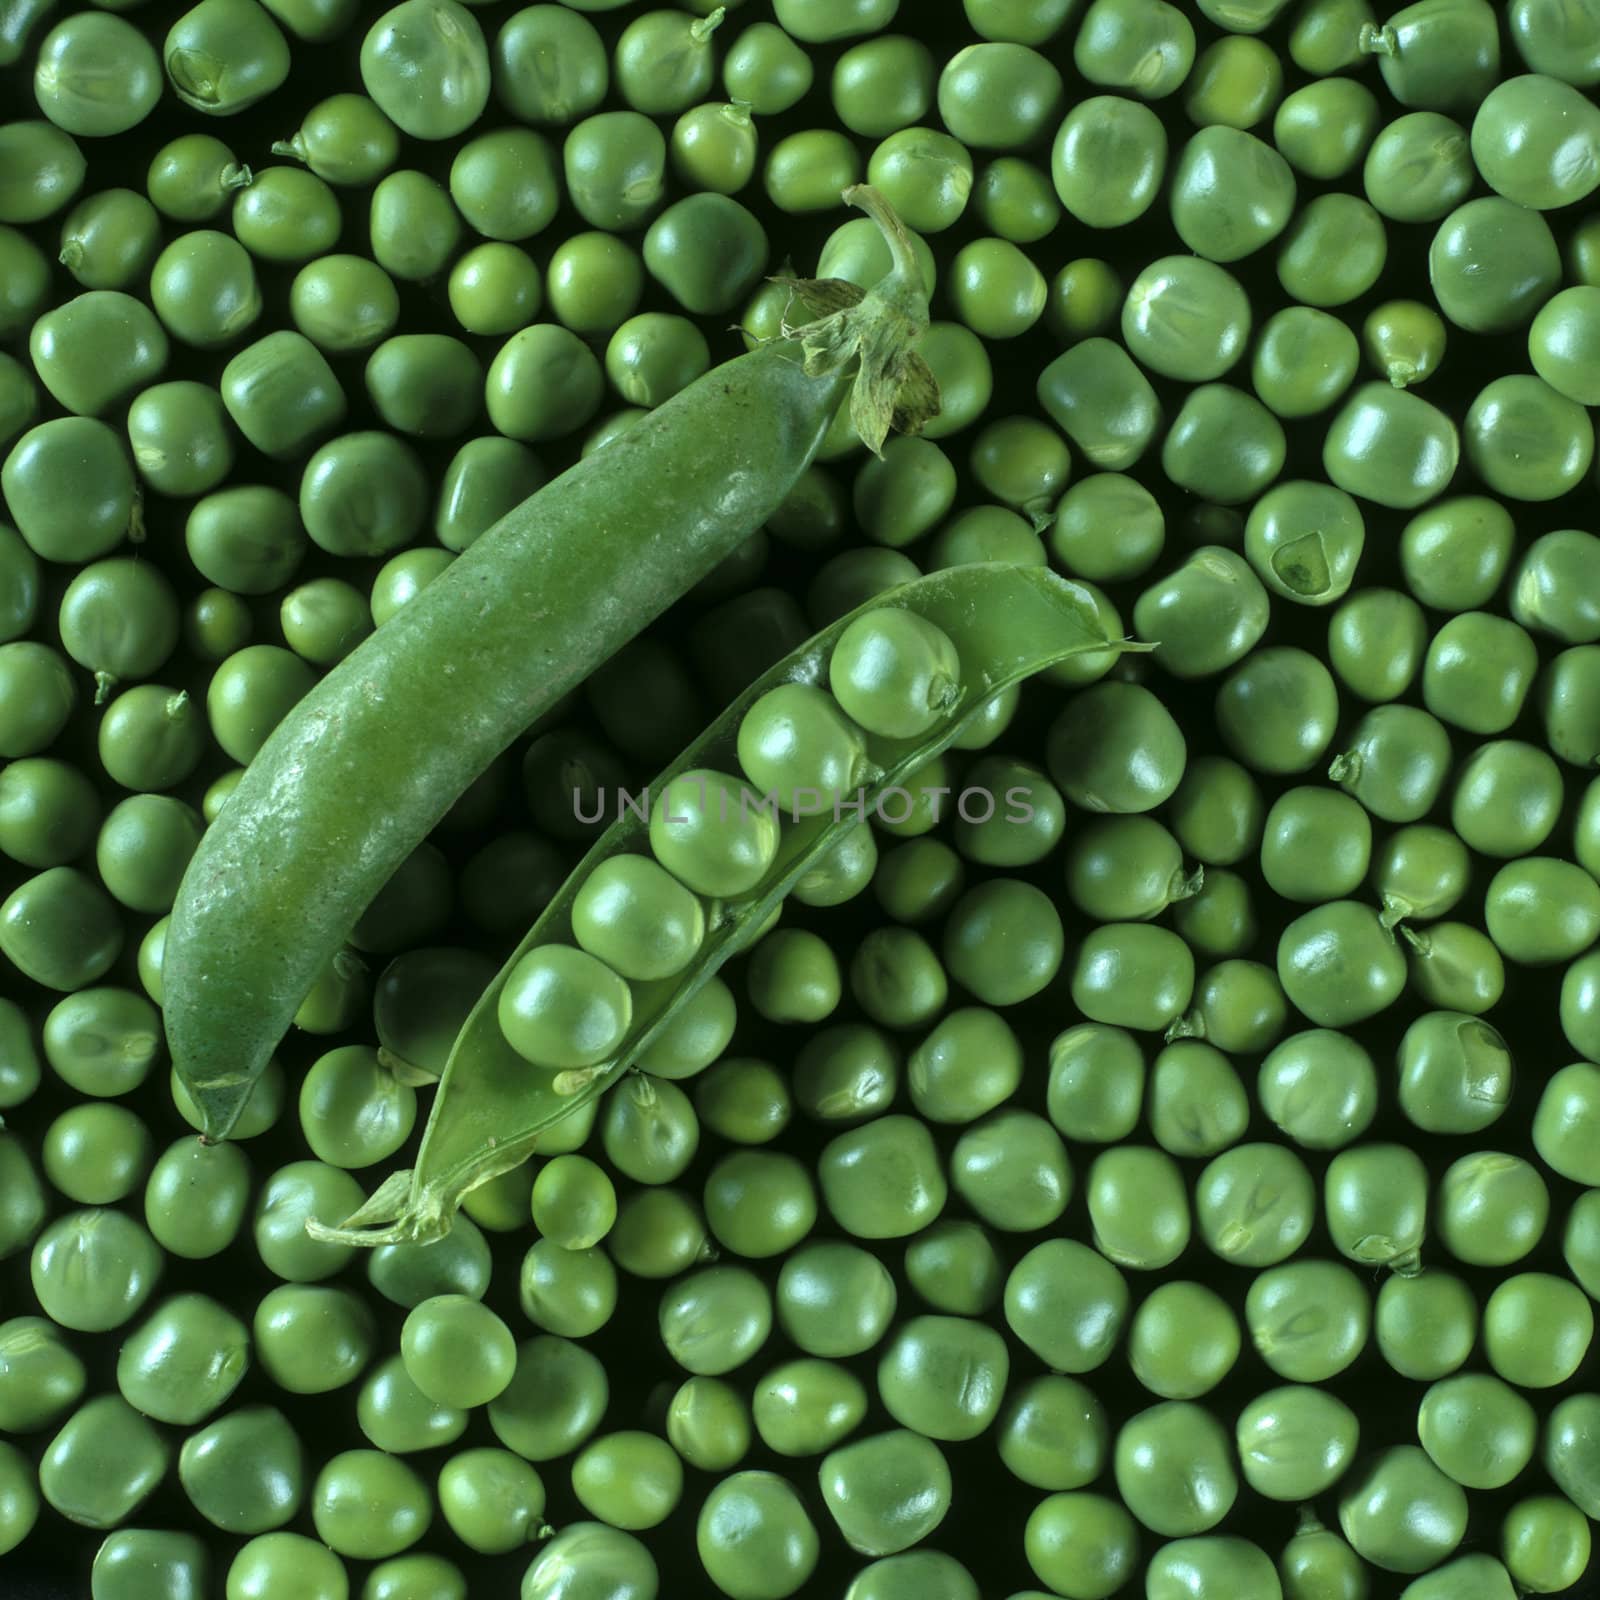 green peas by phbcz